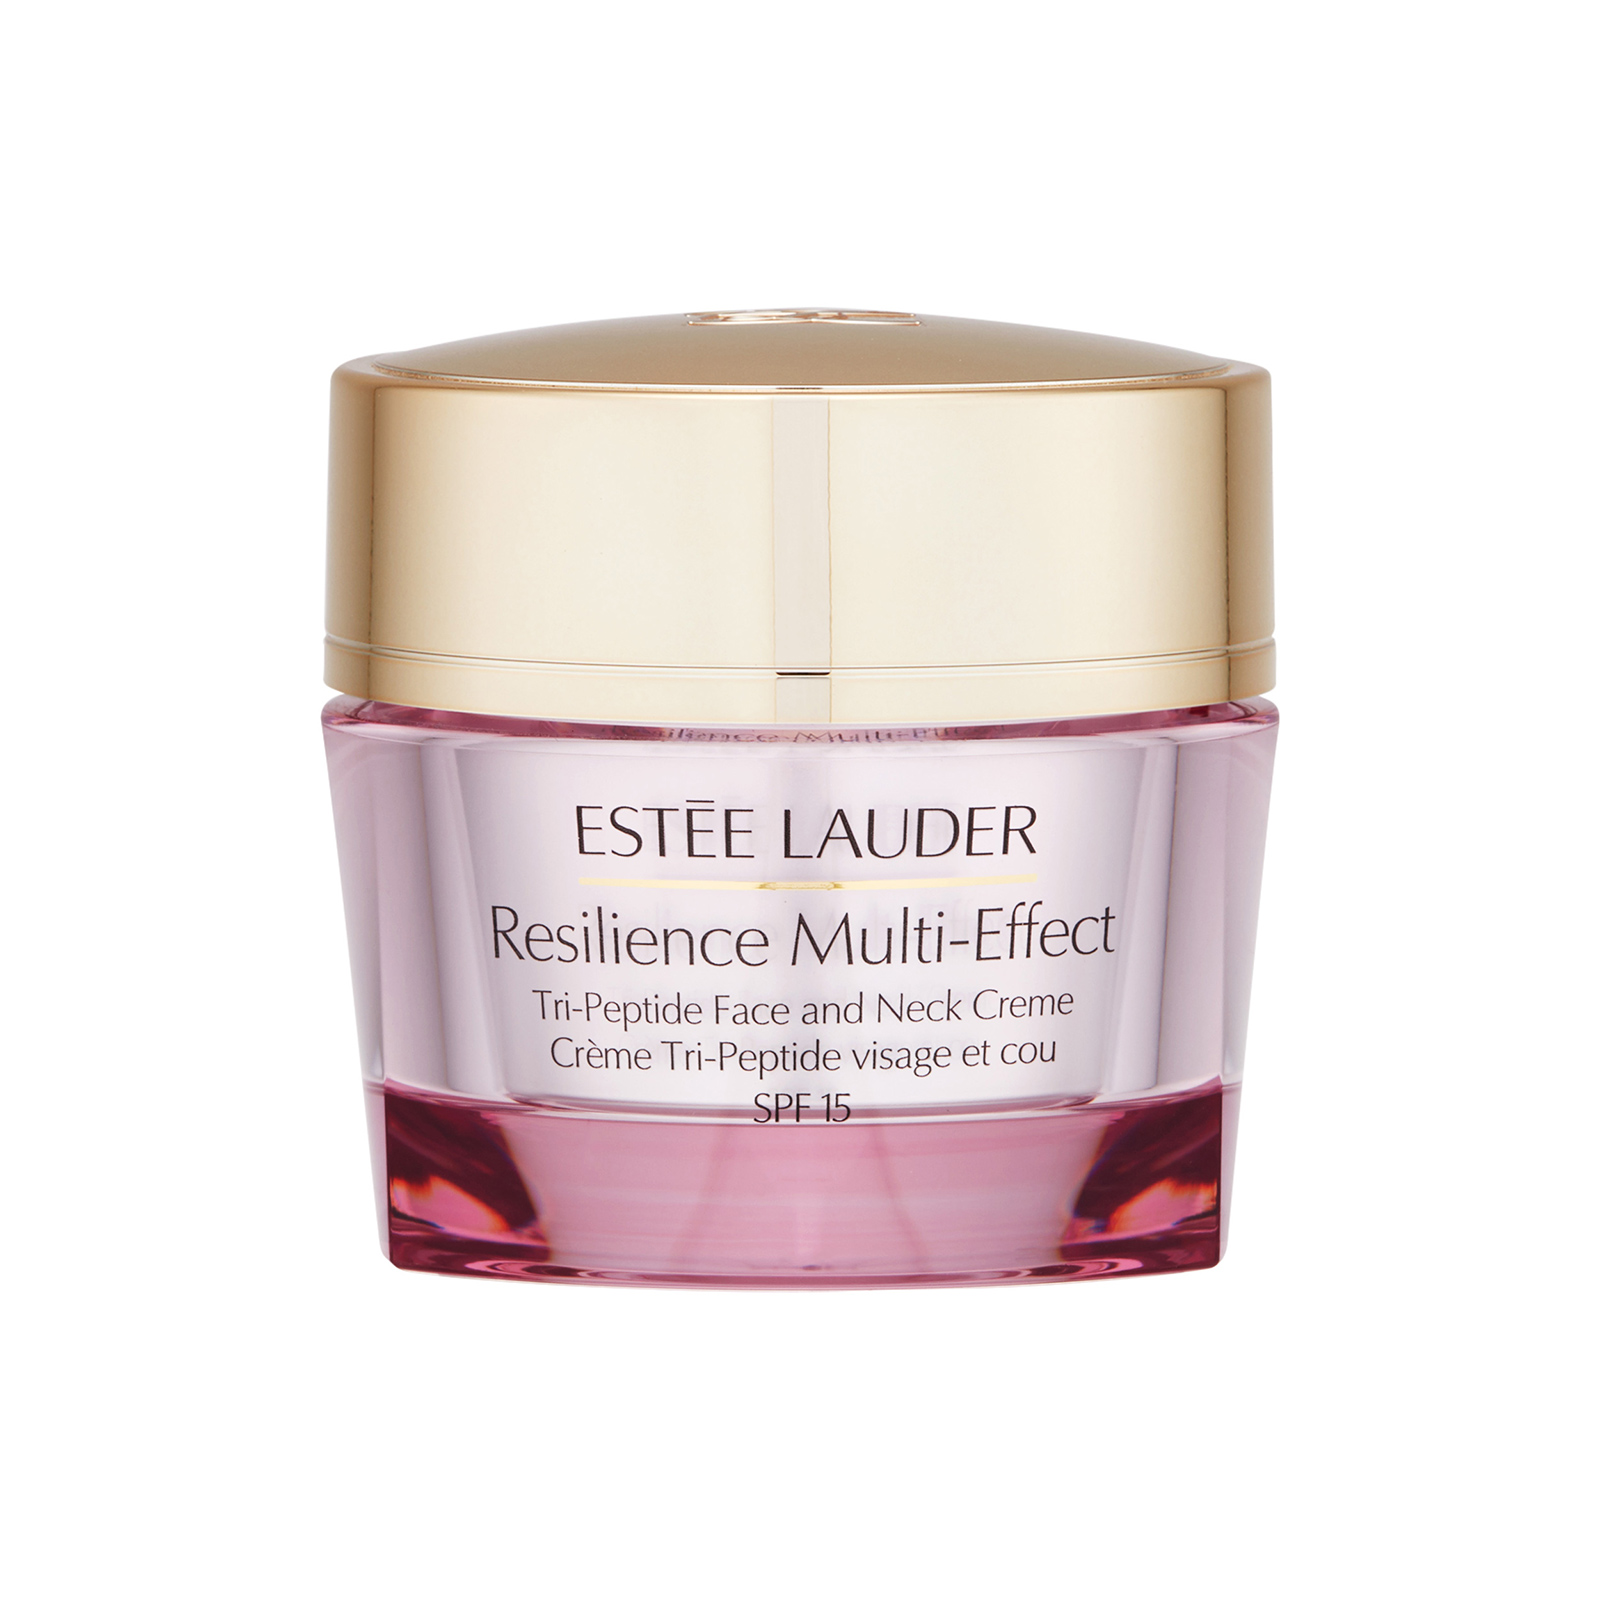 Resilience Multi-Effect Tri-Peptide Face and Neck Creme SPF15 (Normal/ Combination Skin)